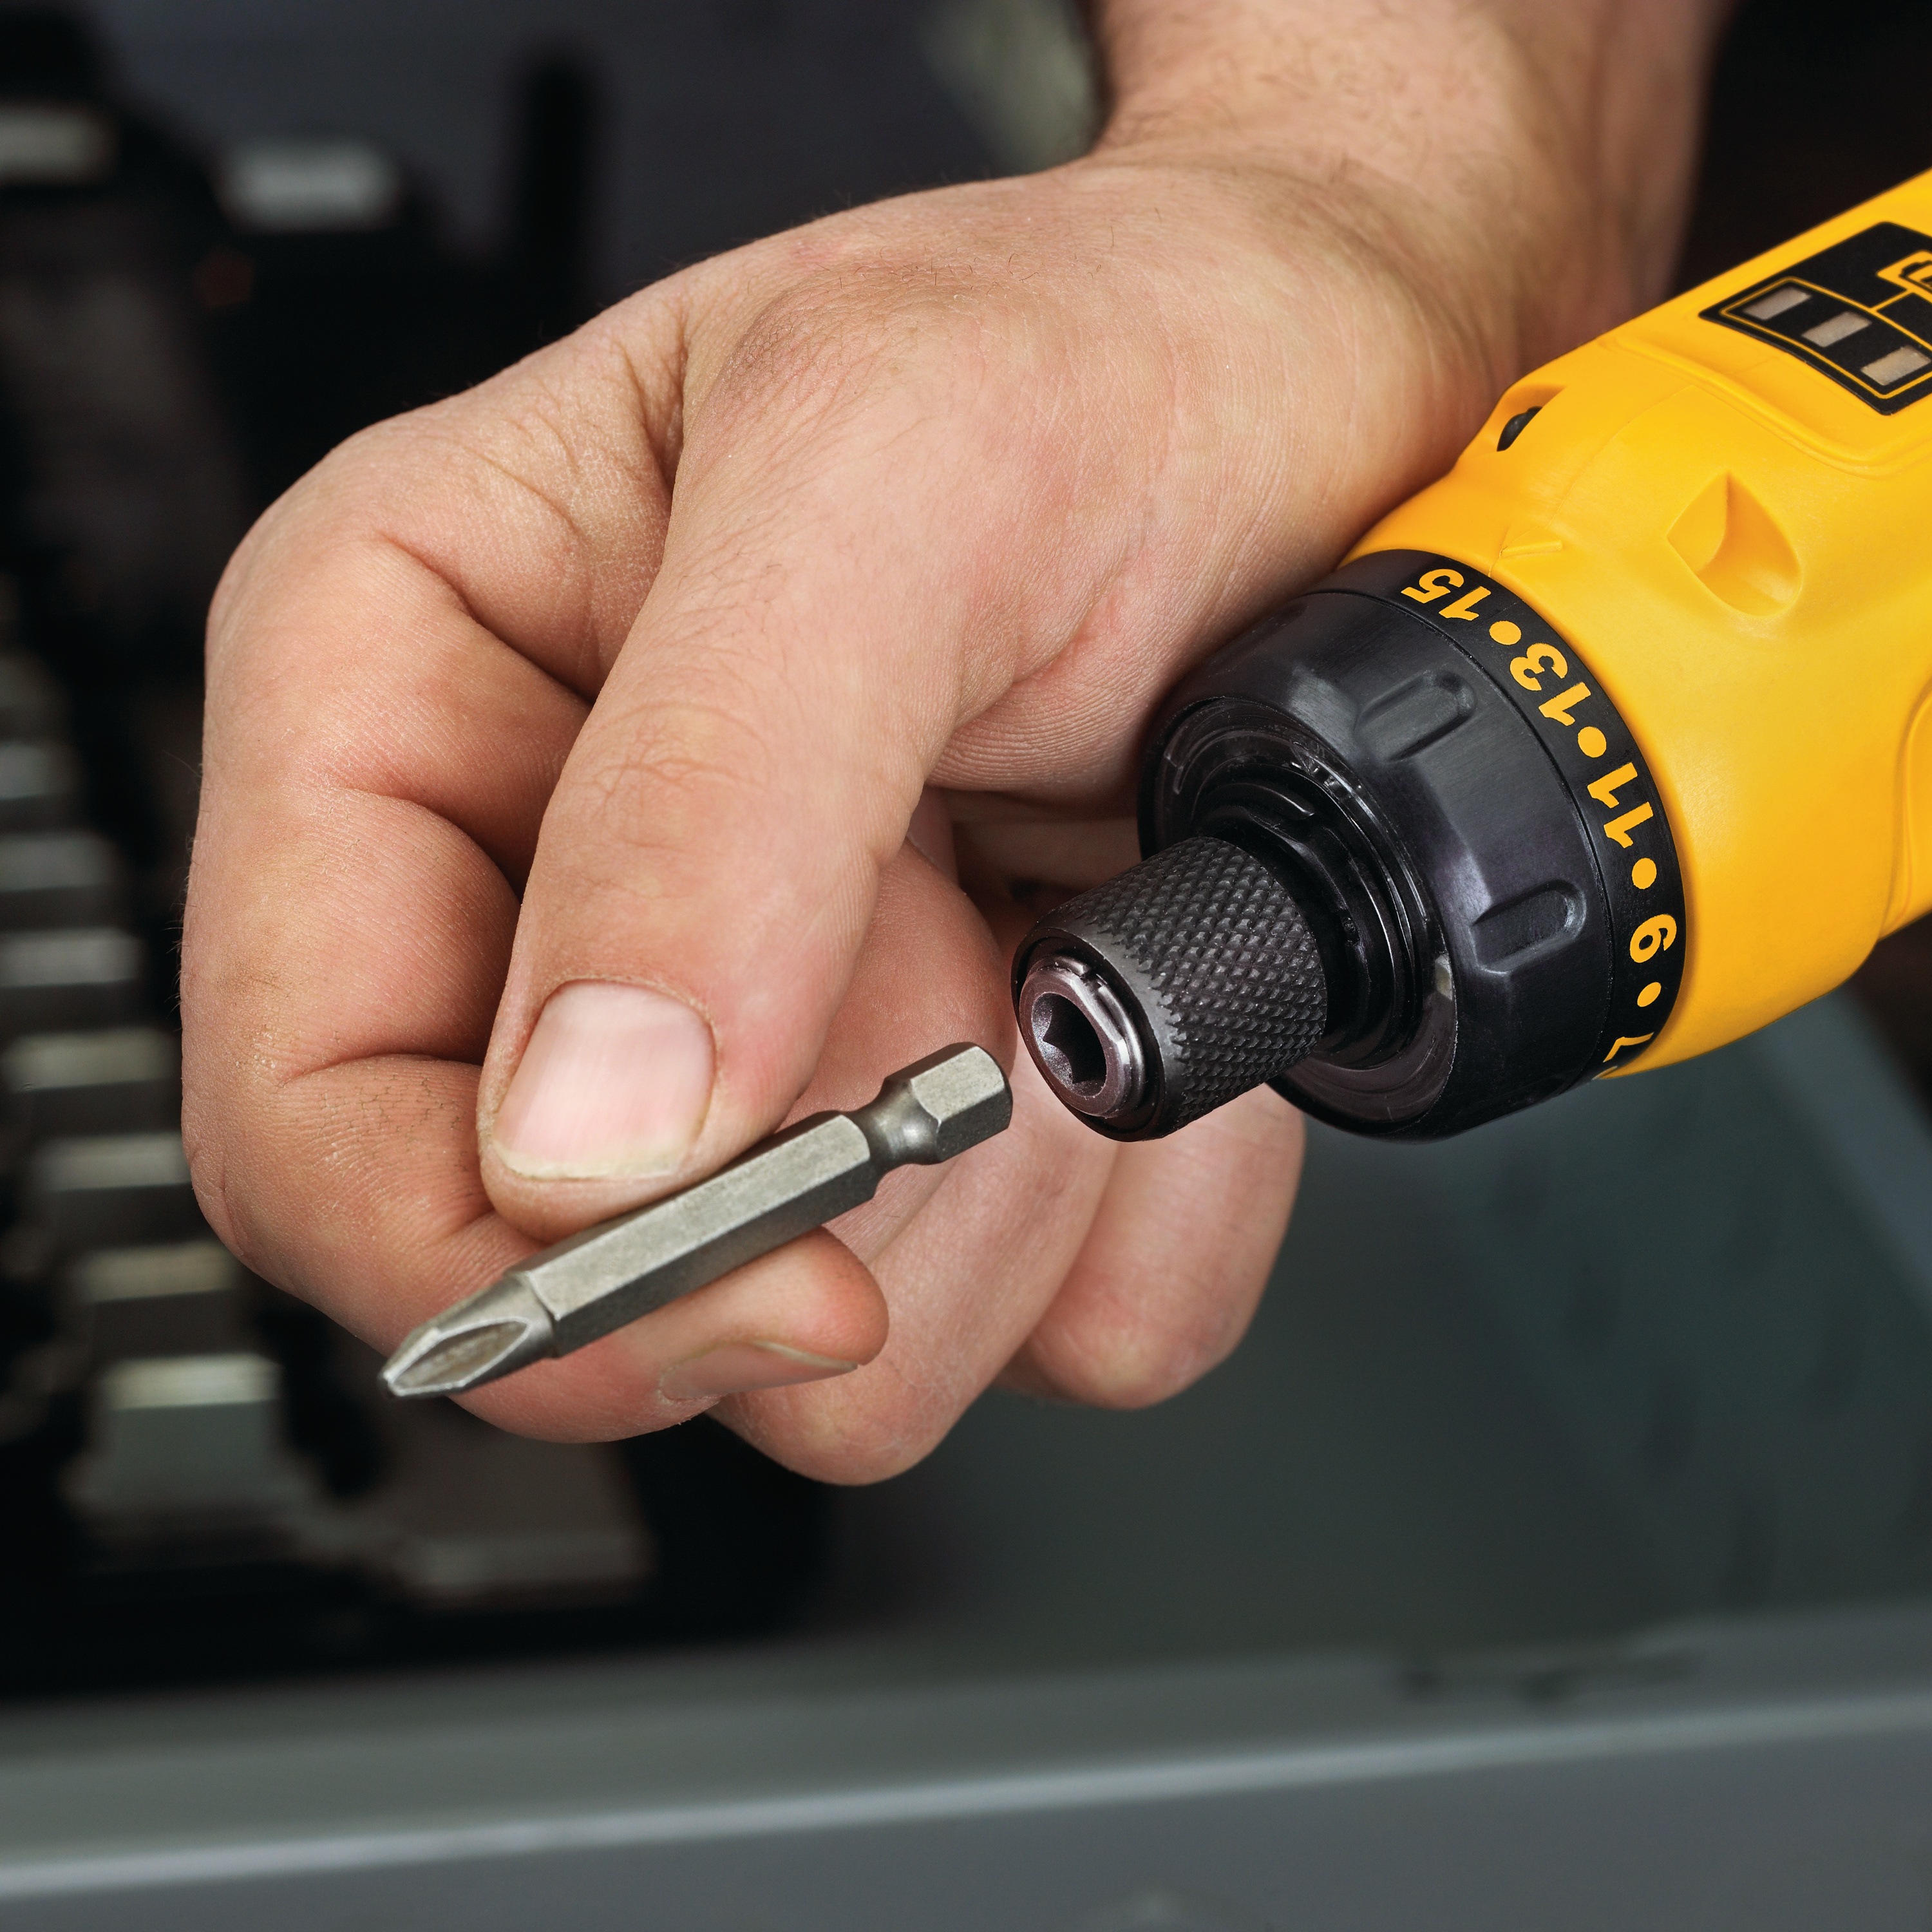 Quick screwdriver bit change feature from hex of gyroscopic screwdriver 2 battery.